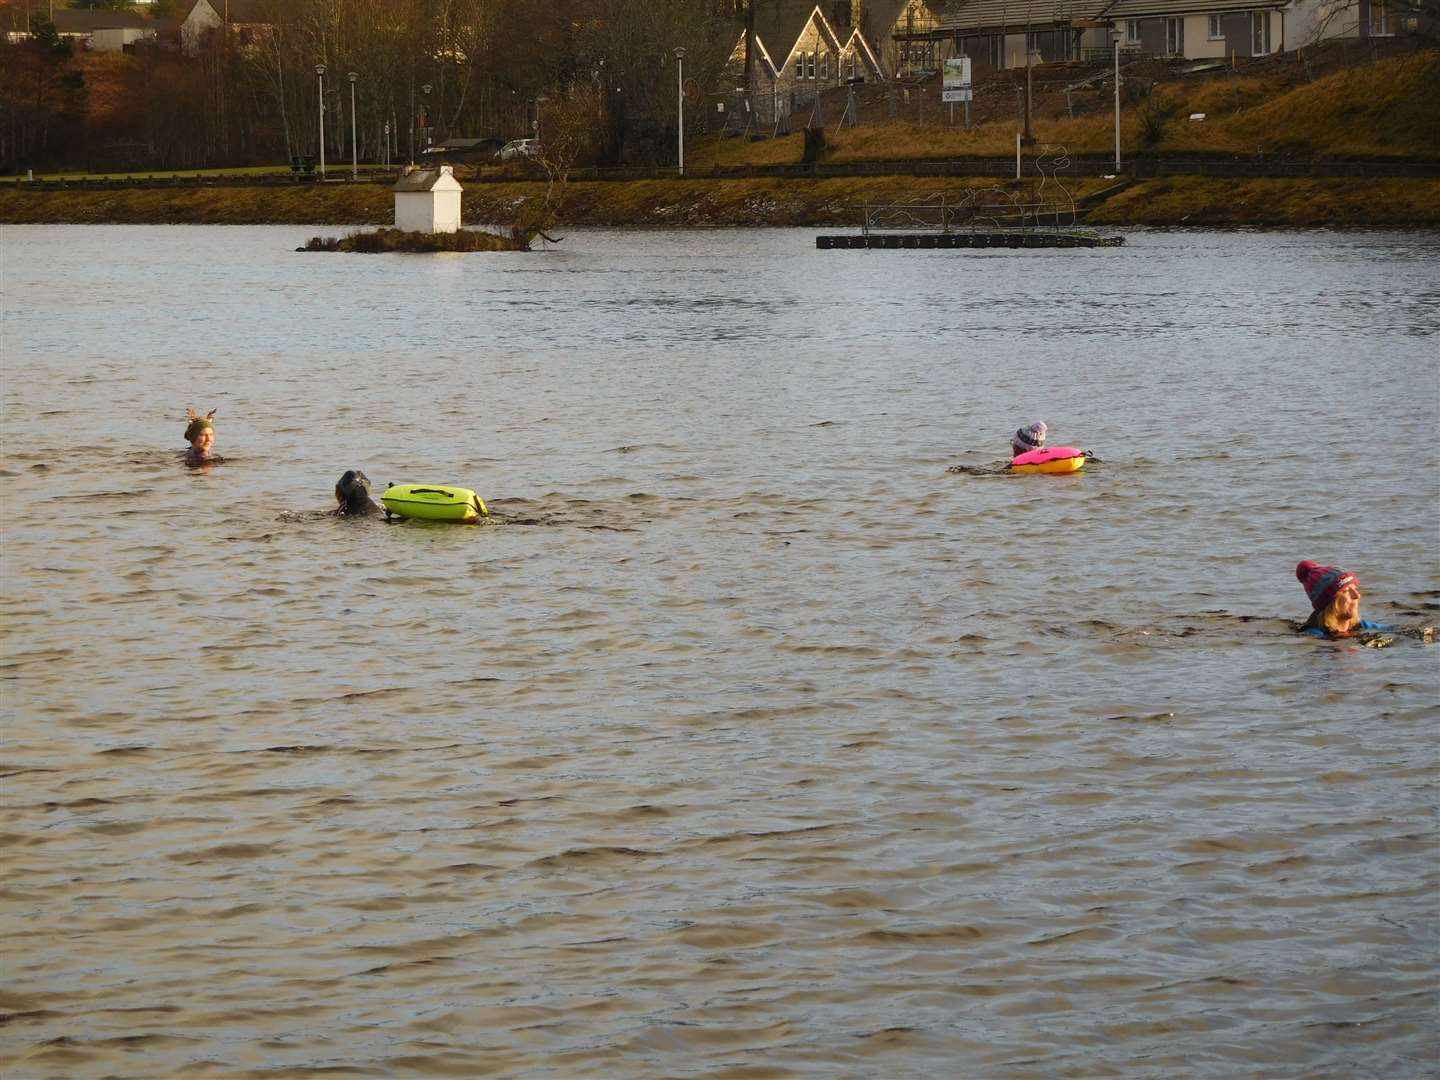 In for a penny, in for a pound – the Loch Shin Swimmers in the water.